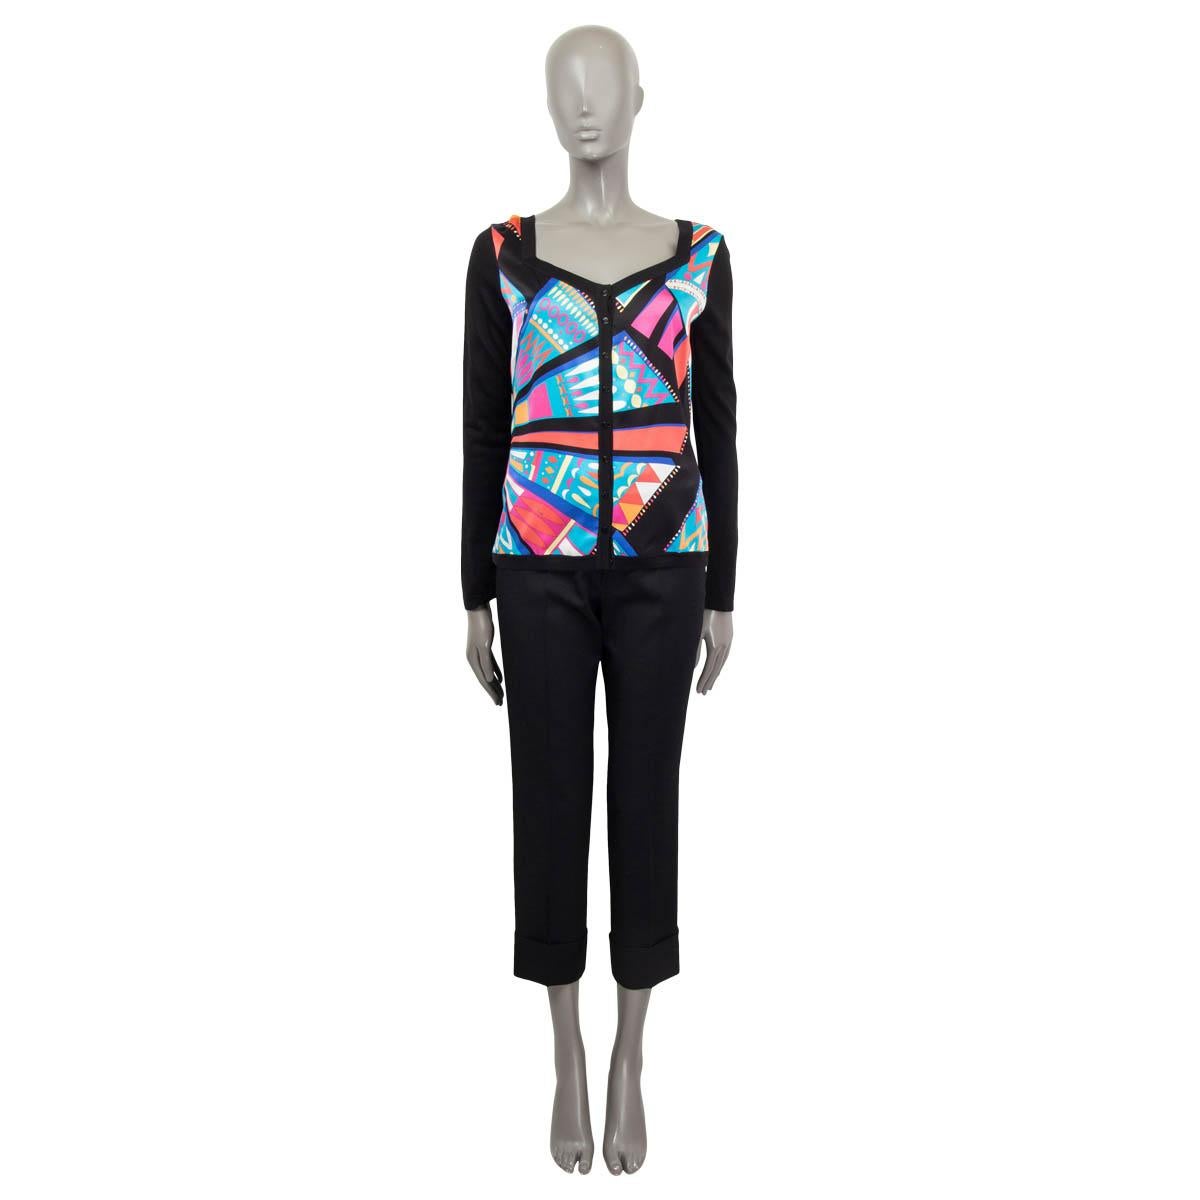 100% authentic Emilio Pucci cardigan in red, blue, black, orange, white and pink colored silk (94%) and elastane (6%). Features a boatneck-like V-neckline, knitted sleeves in black silk (59%) and cotton (41%). Opens with black buttons in the front.